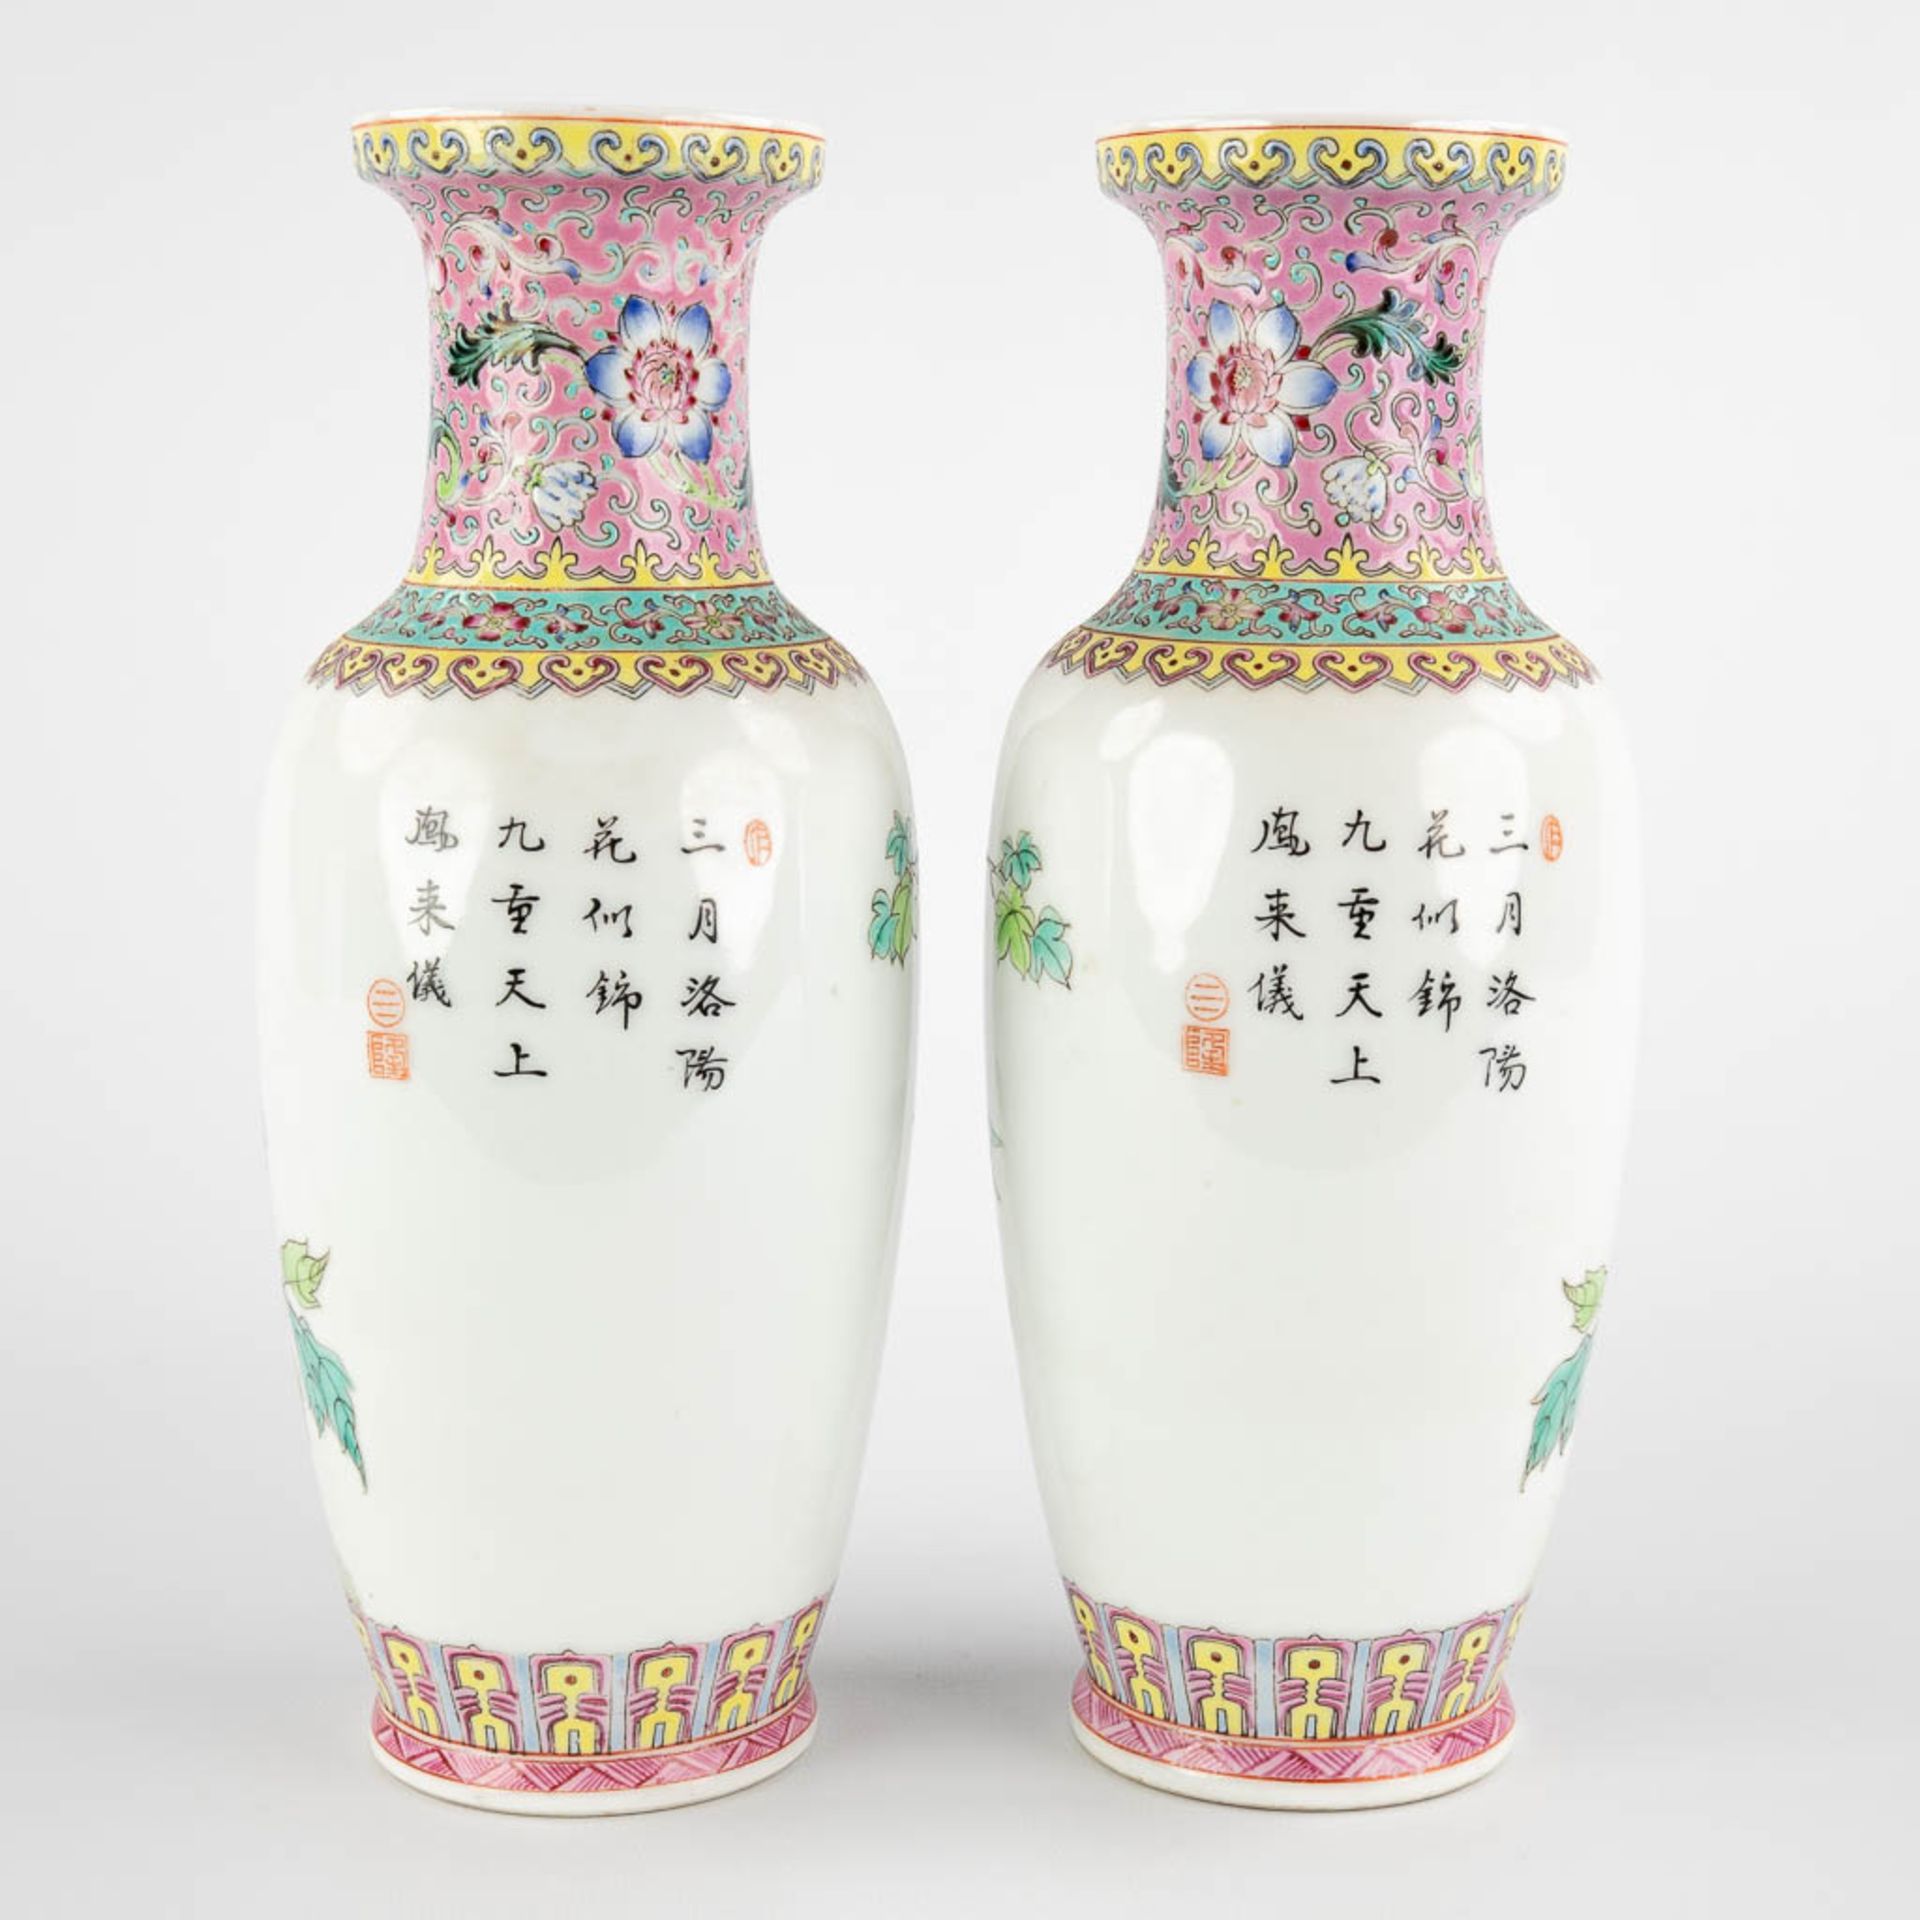 A pair of Chinese vases with fine decor of Phoenixes. 20th C. (H:26 x D:10 cm) - Image 4 of 10